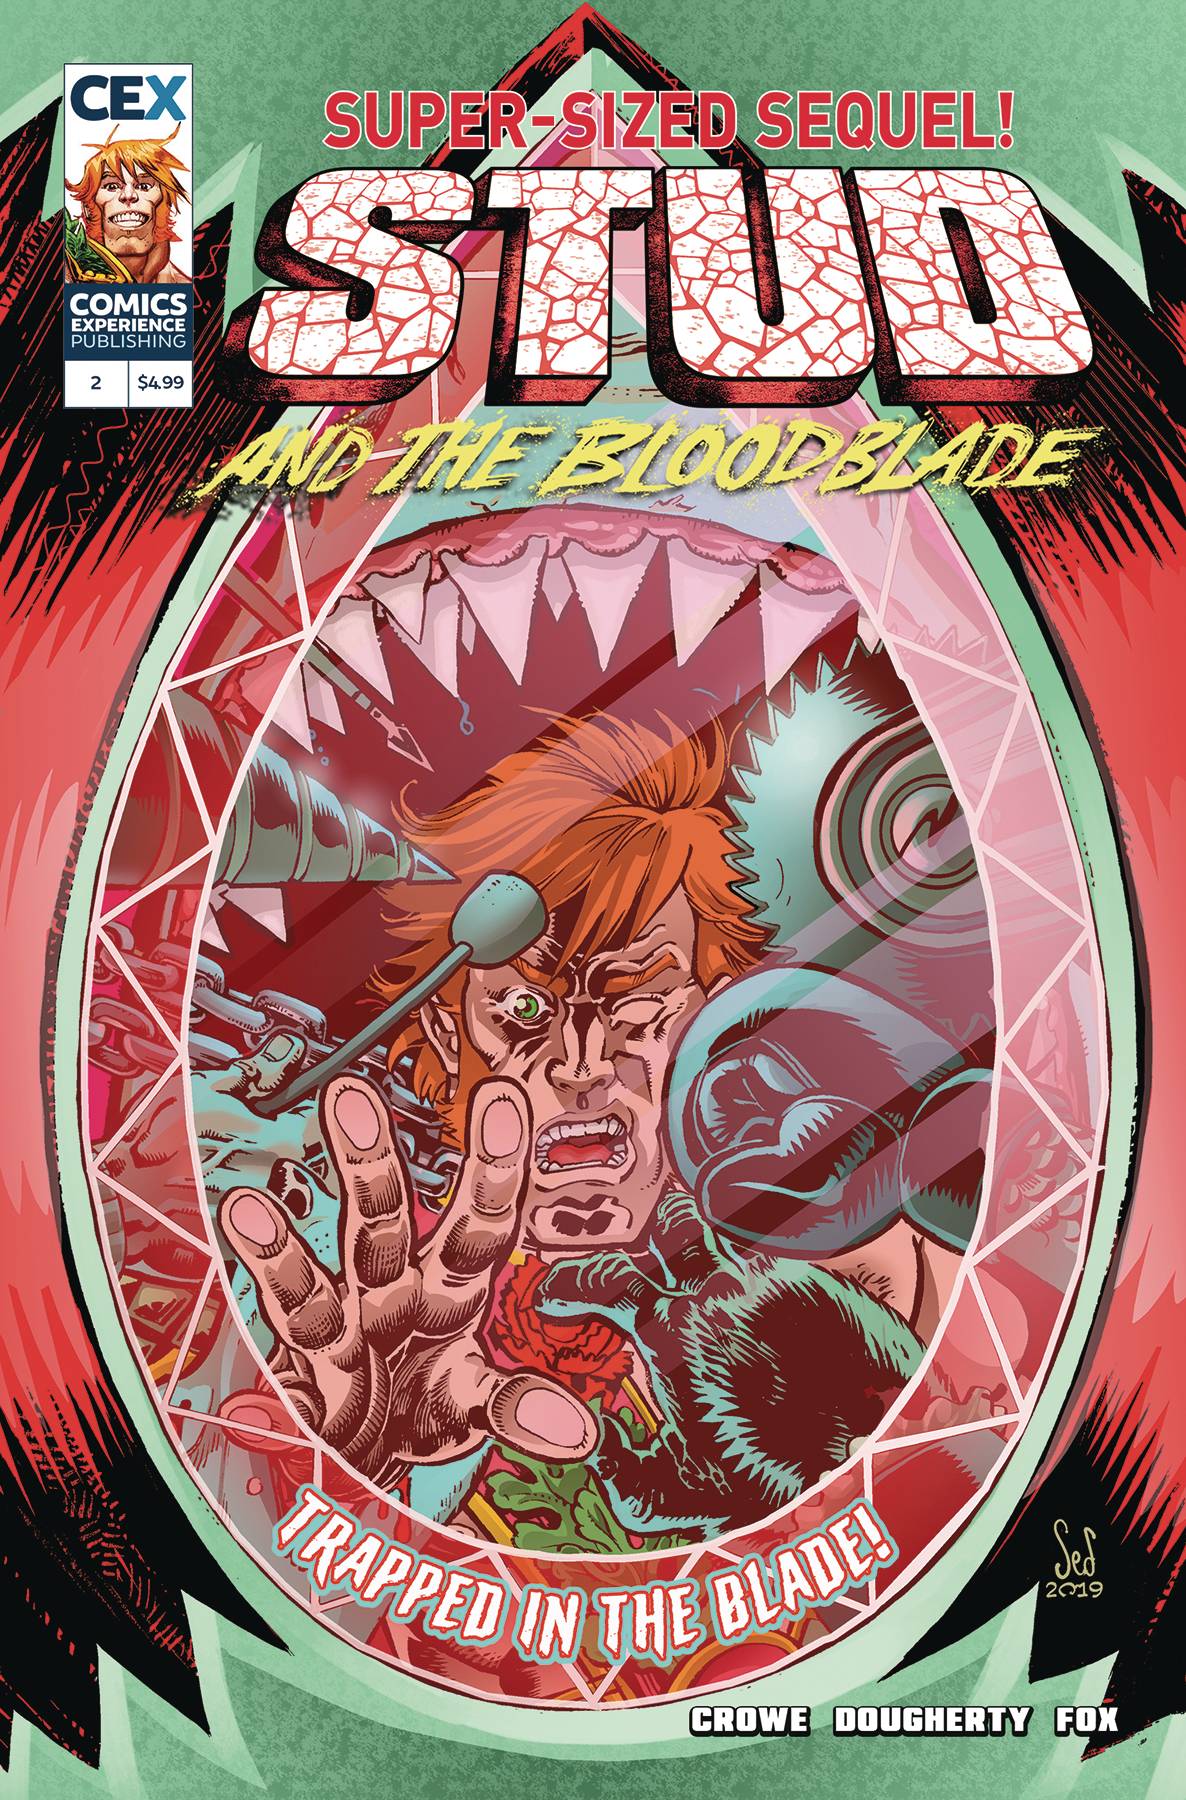 STUD & THE BLOODBLADE #2 (OF 3) CVR A DOUGHERTY (MR)